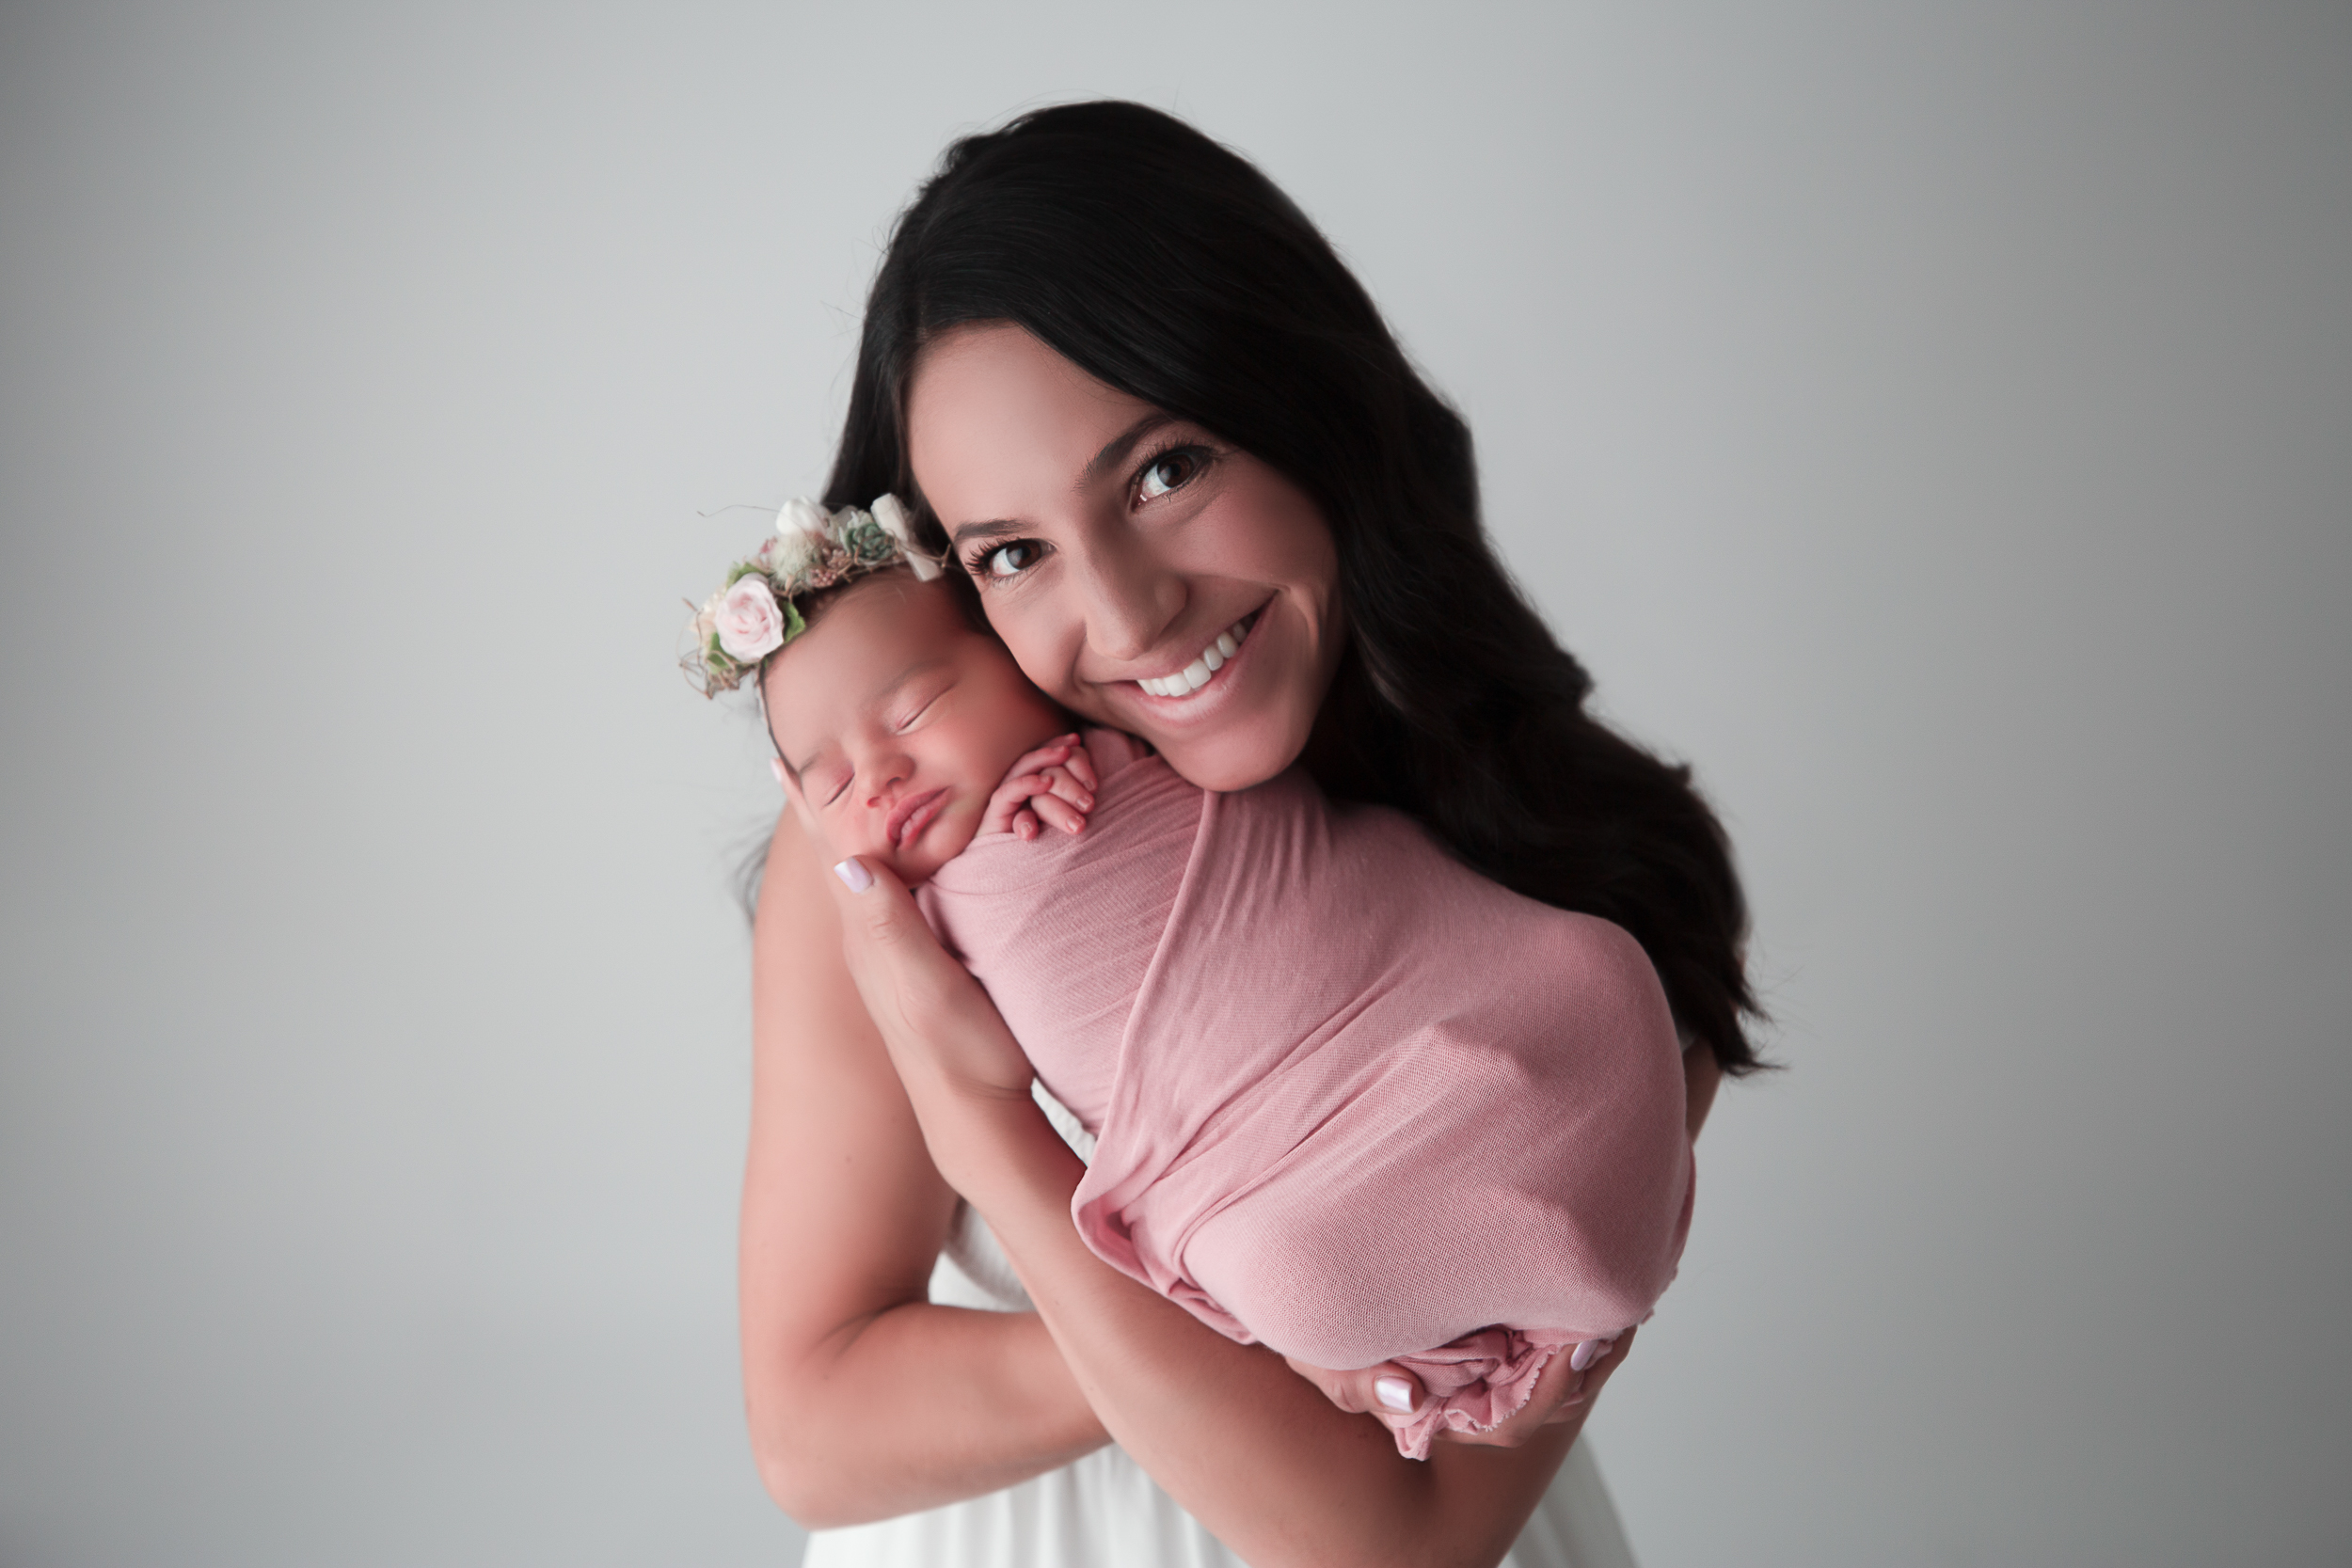 Bruneete Mother holding her baby who is wrapped in a pink swaddle and floral headband